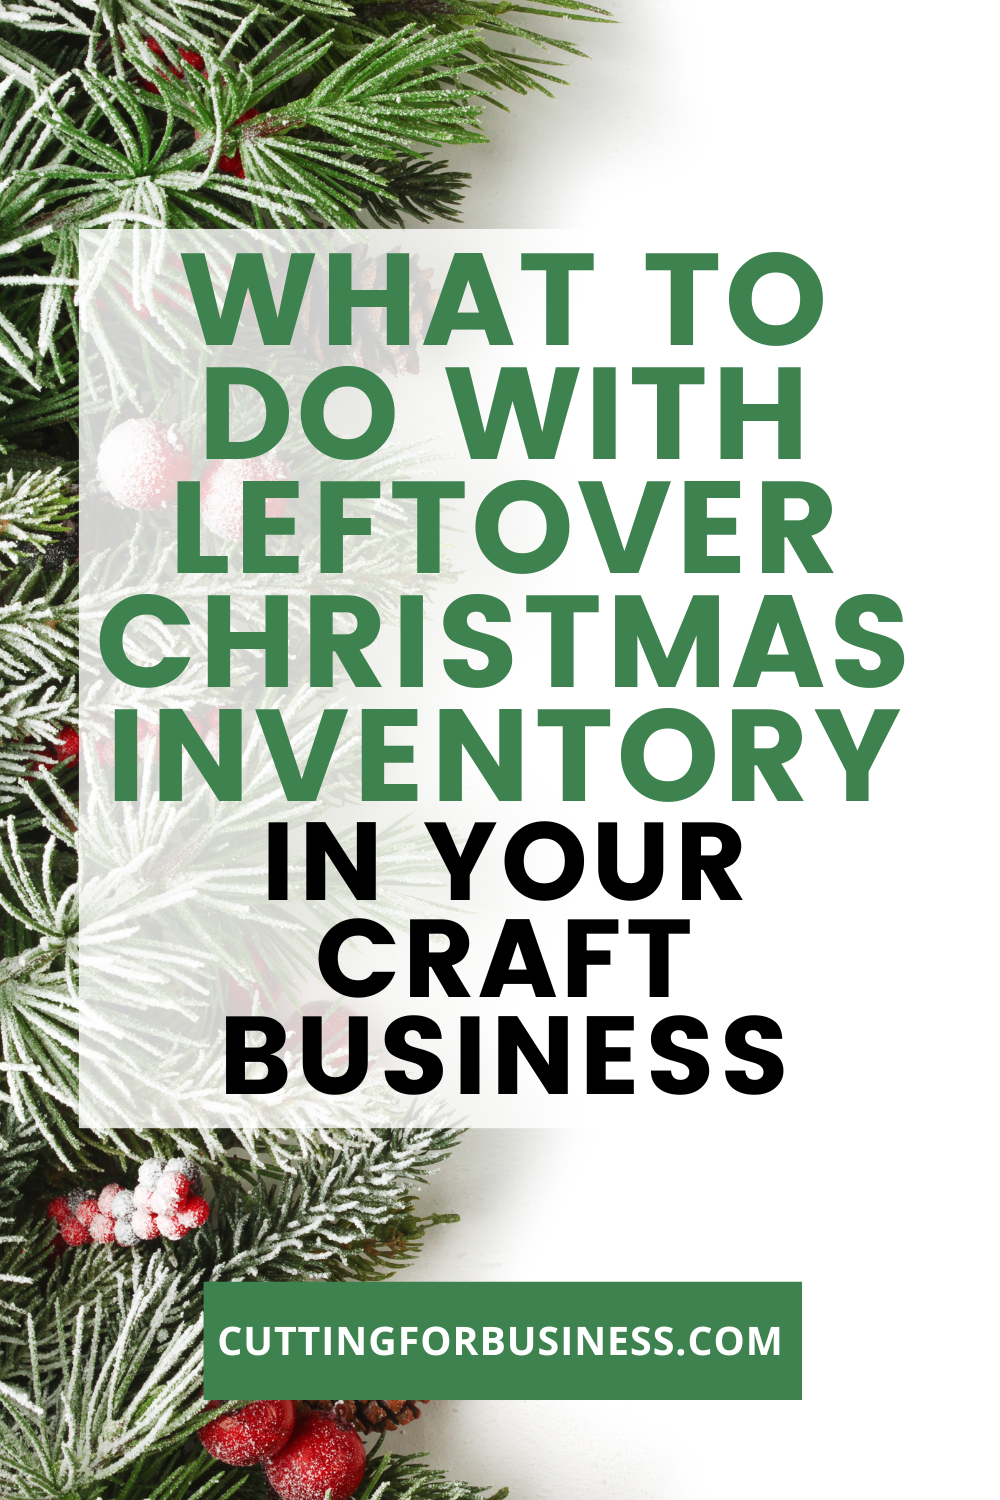 What to Do With Leftover Christmas Inventory - cuttingforbusiness.com